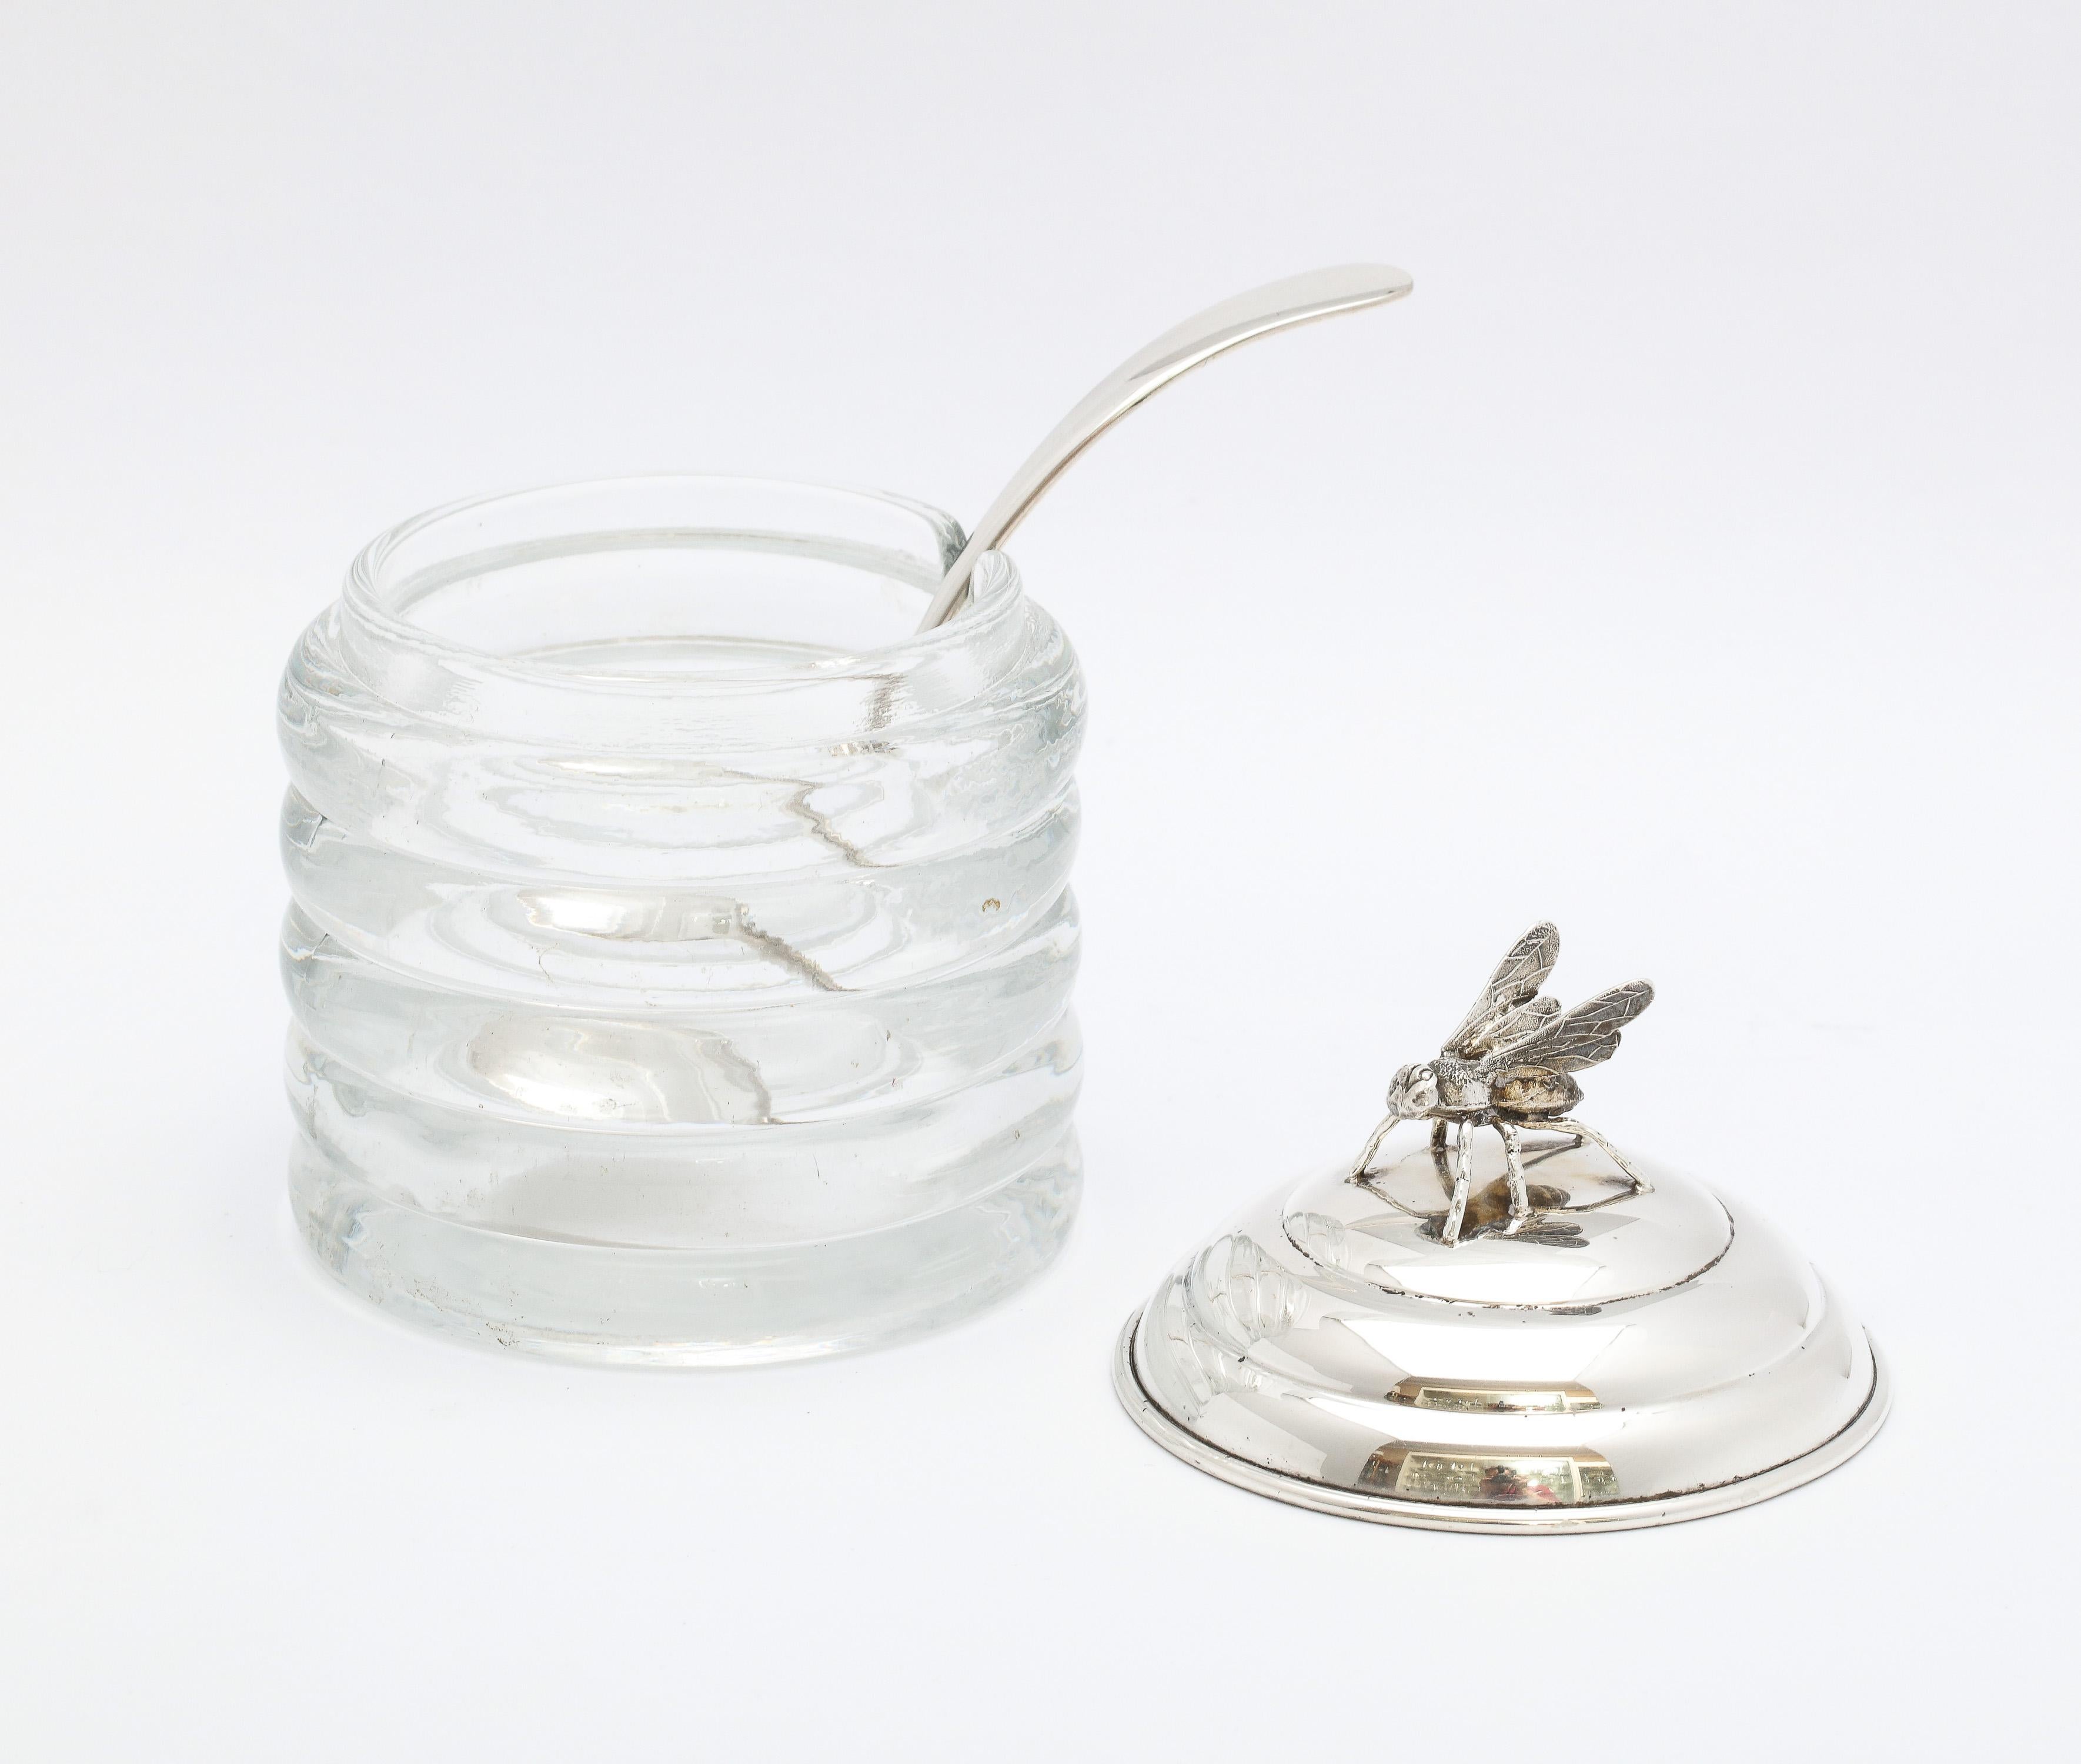 Art Deco Period Sterling Silver-Mounted Honey Jar with Original Honey Spoon 4